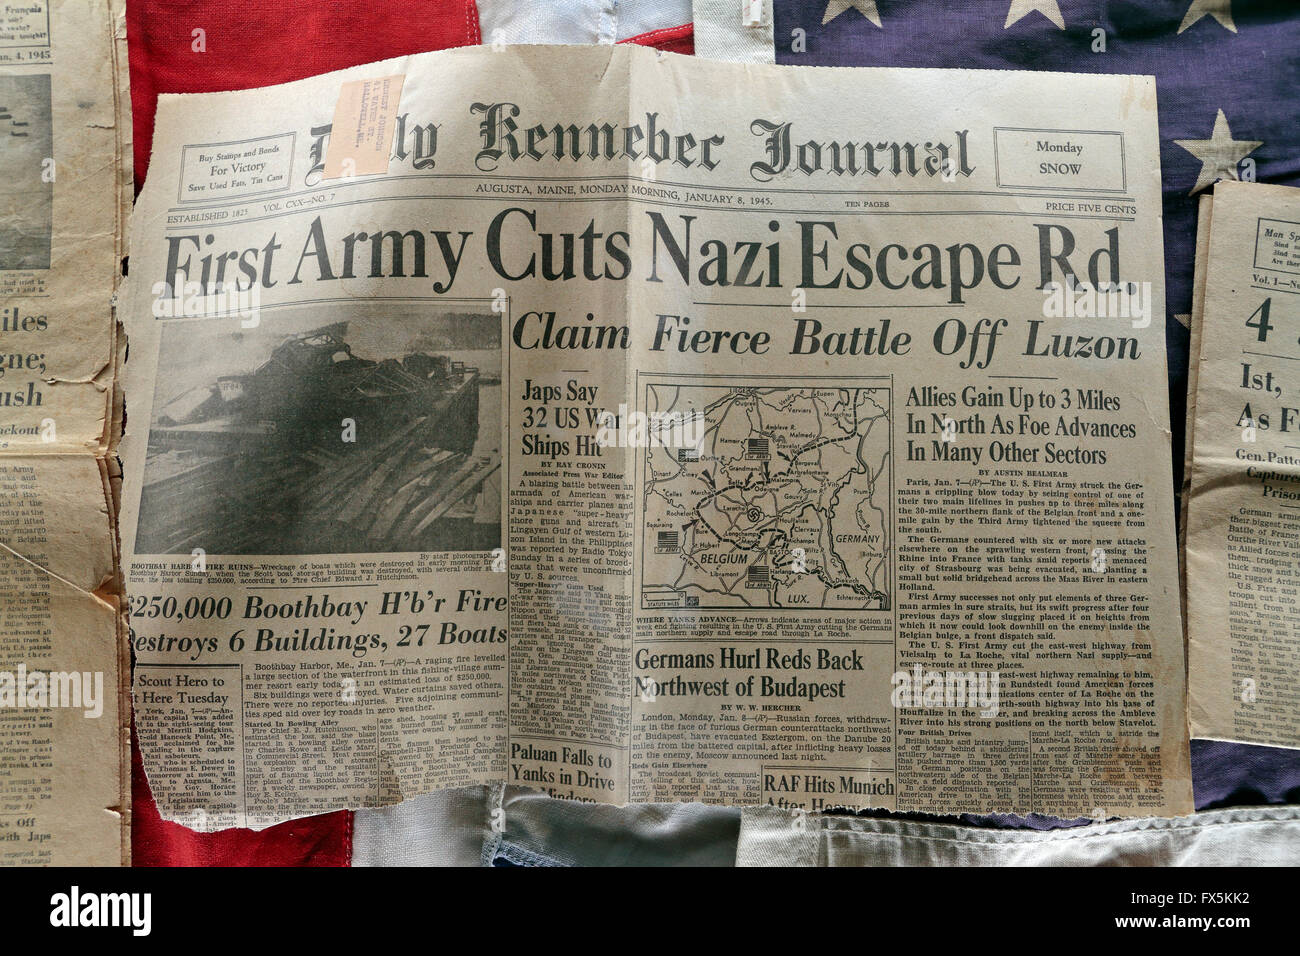 Daily Kennebec Journal front page during the Battle of the Bulge, Monday 8 Jan 1945, Bastogne War Museum, Bastogne, Belgium. Stock Photo